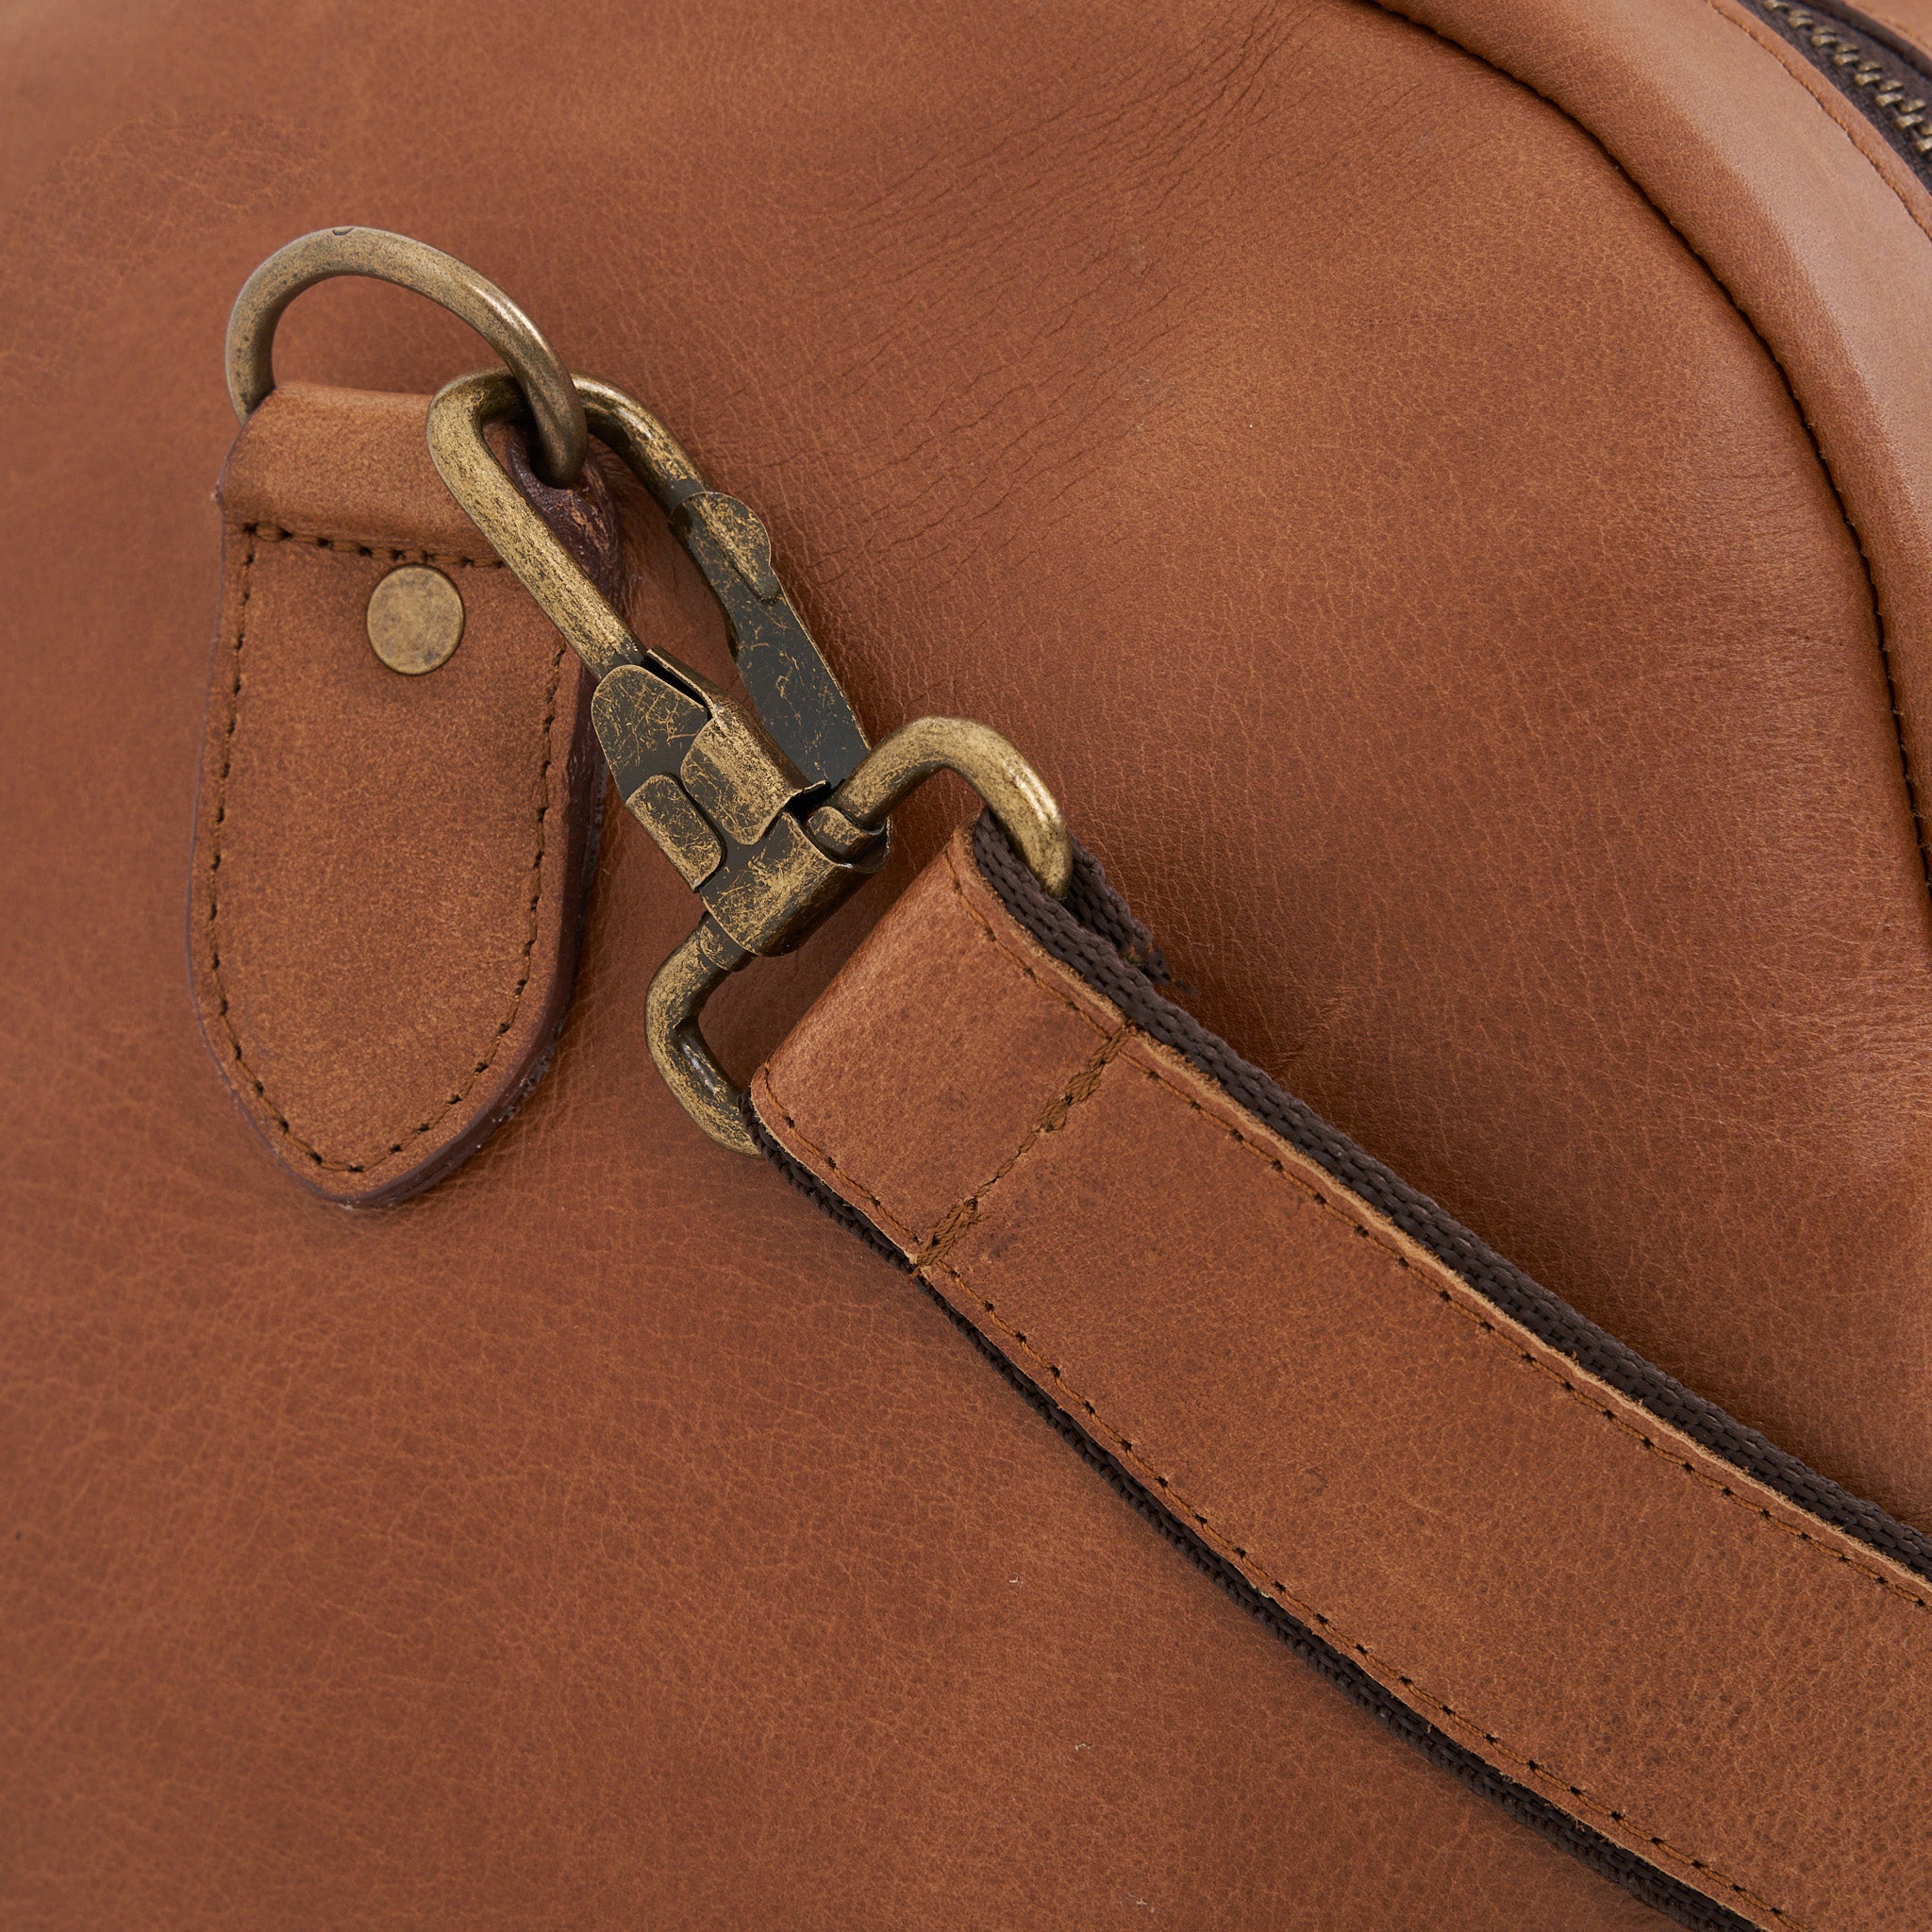 Strap detail on Pecan Genuine Leather Sports Duffel Bag with Waterproof Lining &amp; Sneaker Compartment